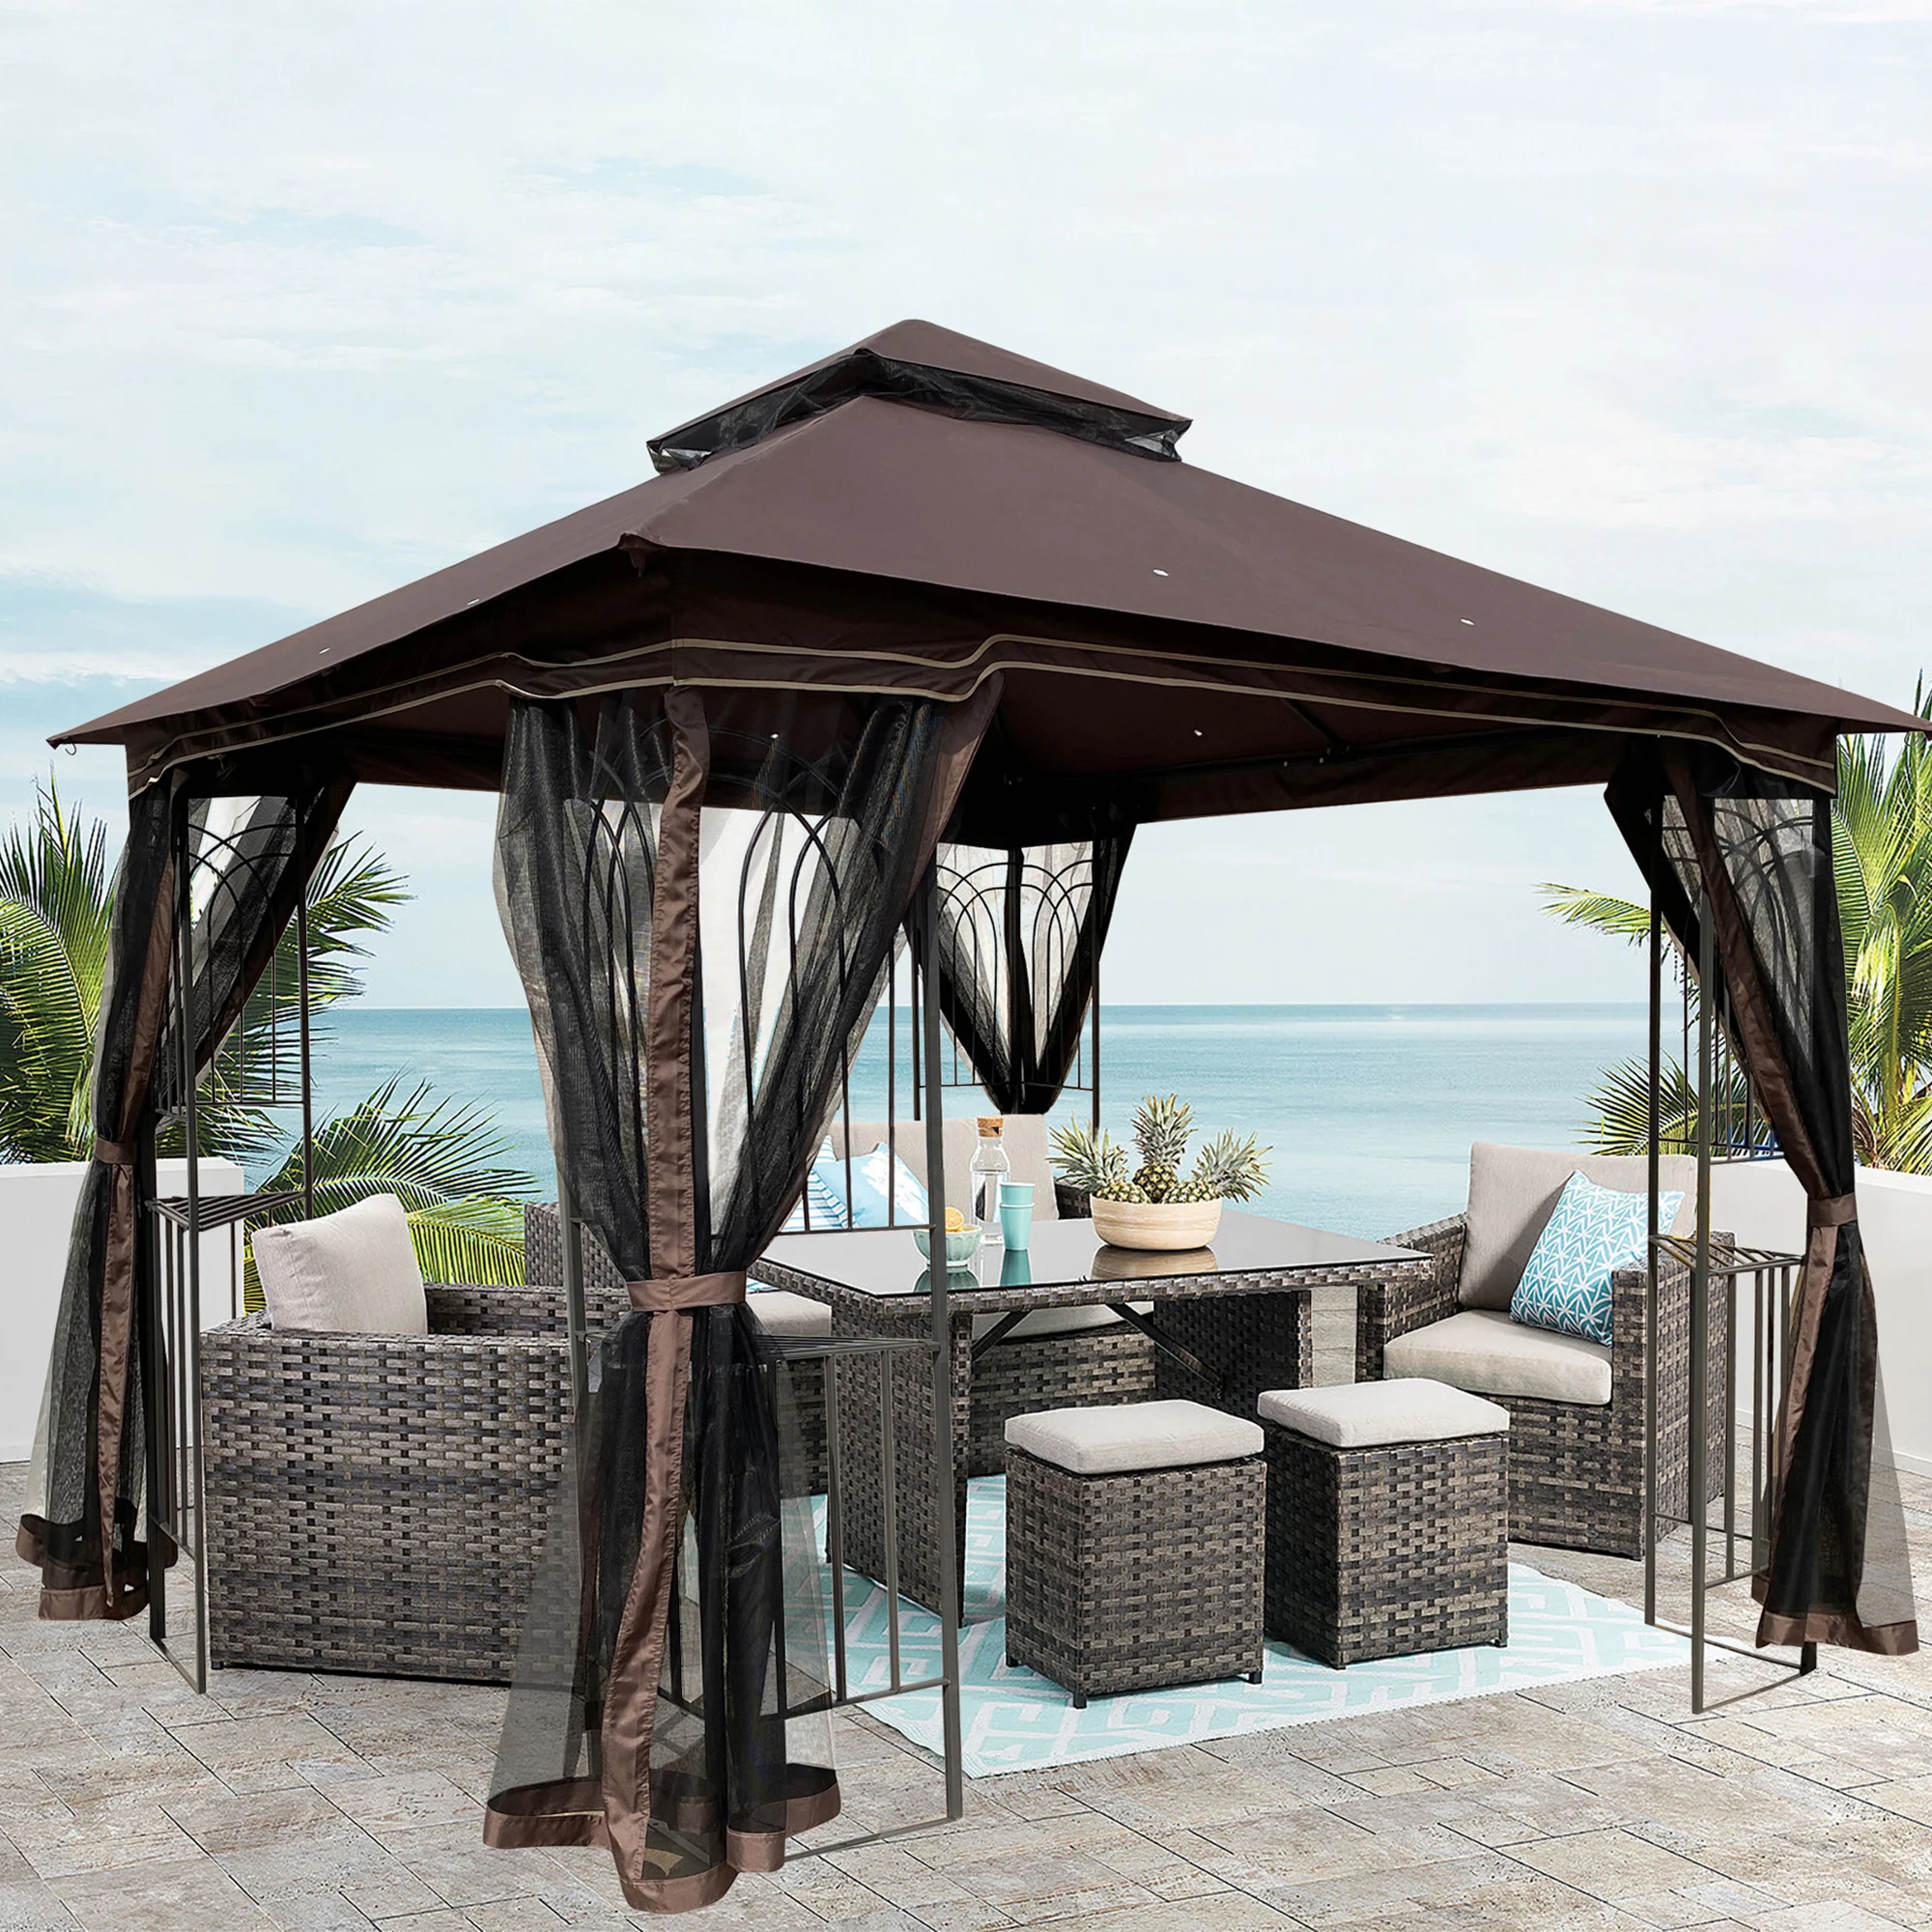 

10x10 Outdoor Patio Gazebo Canopy Tent With Ventilated Double Roof And Mosquito Net Suitable for Lawn, Garden, Backyard and Deck